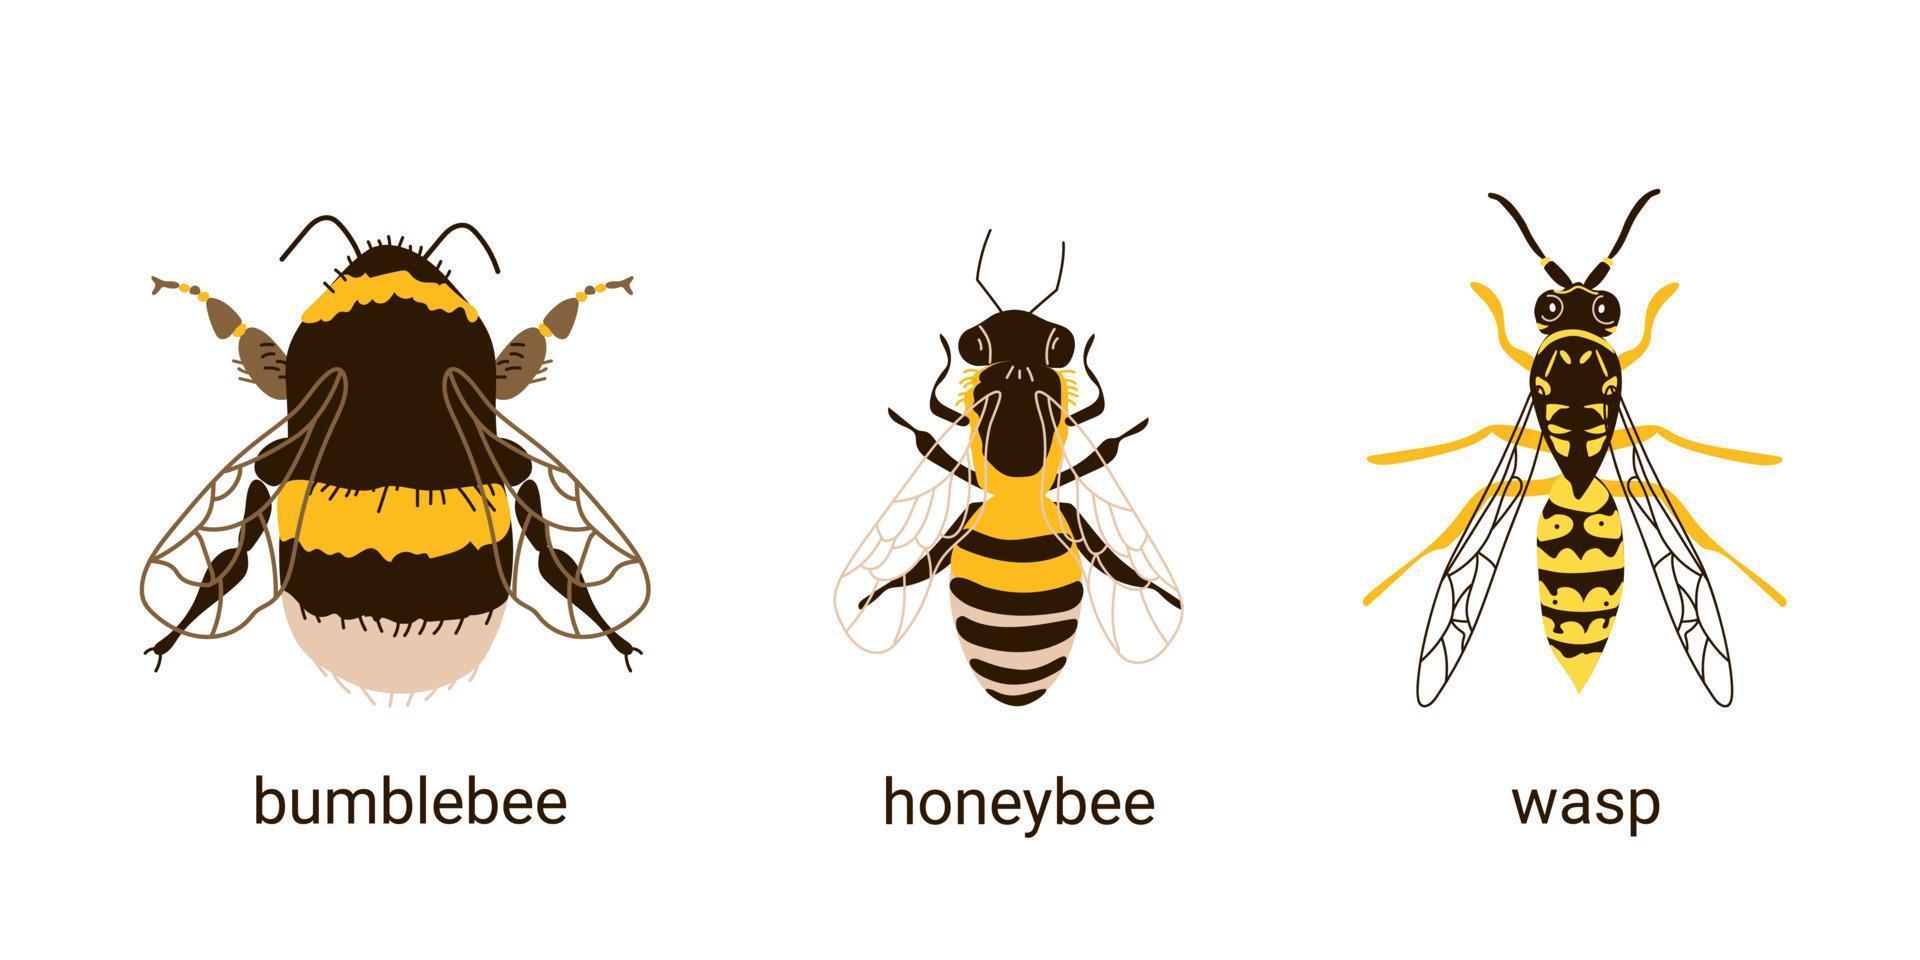 Comparison of three insects bee, wasp and bumblebee vector